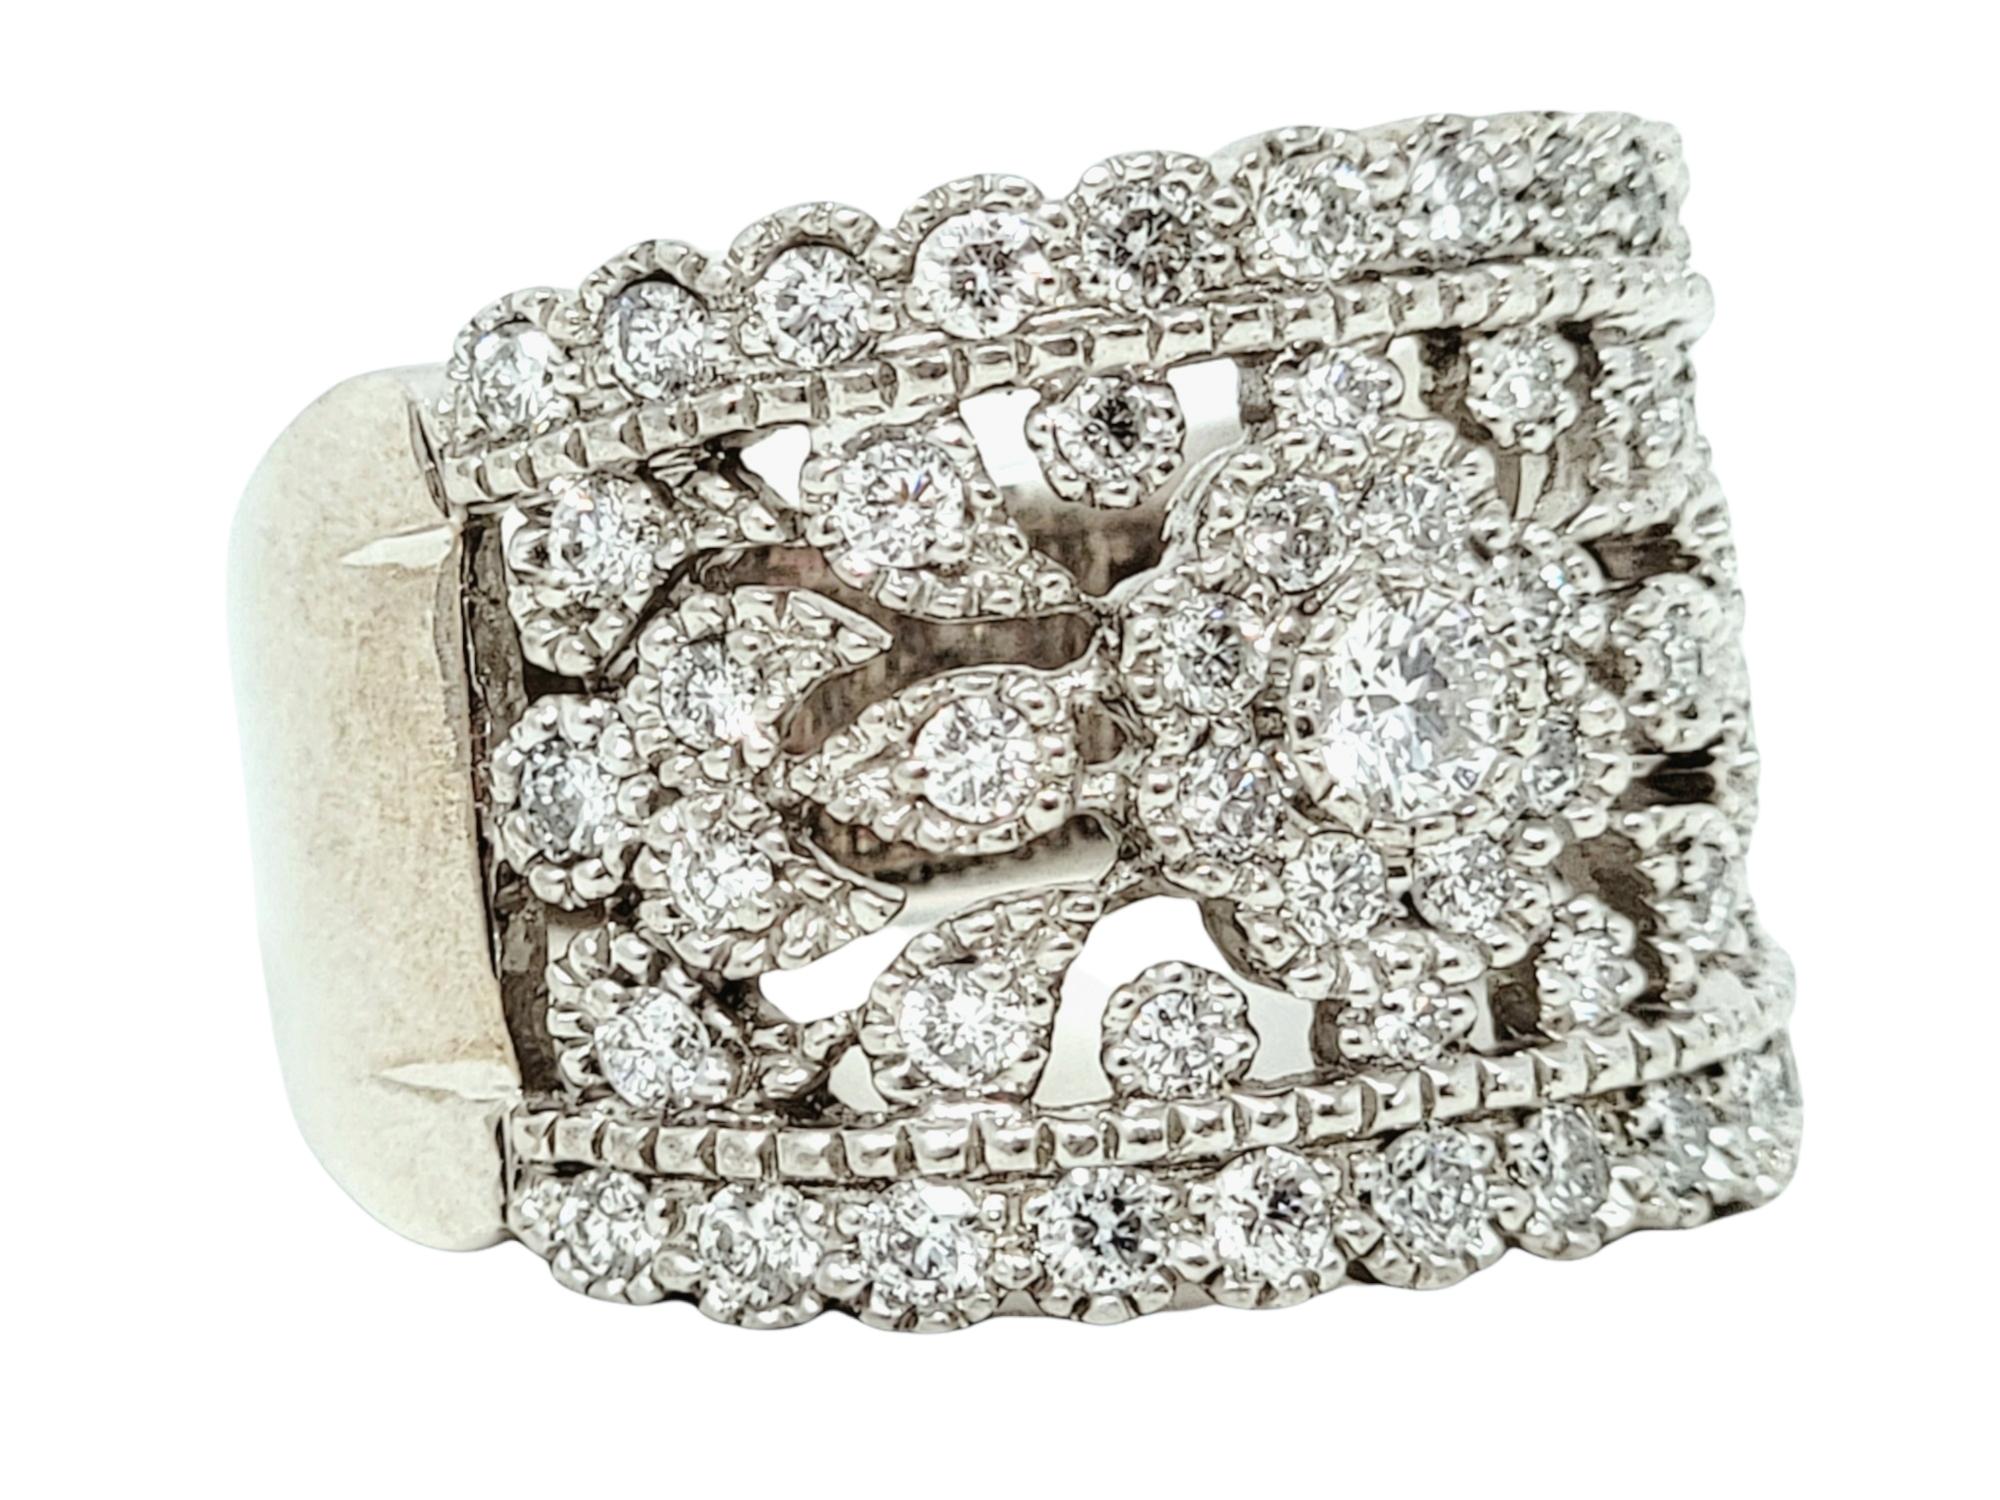 Ring size: 7.75

This beautiful, ornate diamond band ring fills the finger with shimmering sparkle. The flower cluster at the center is surrounded by intricate cut outs and subtle milgrain detailing, while the exceptional diamonds glitter from every